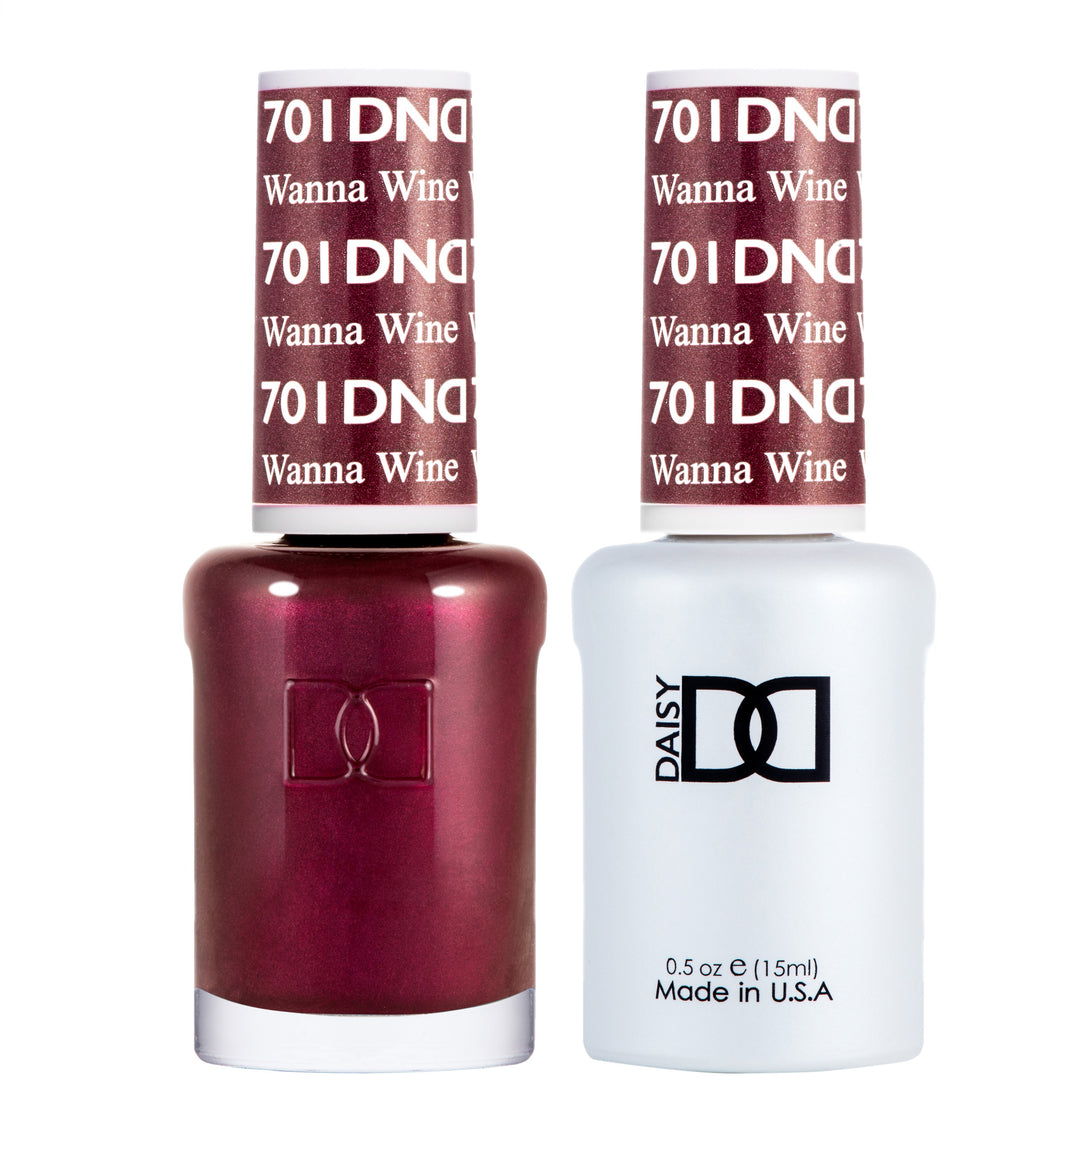 DND DUO Nail Lacquer and UV|LED Gel Polish Wanna Wine 701 (2 x 15ml)